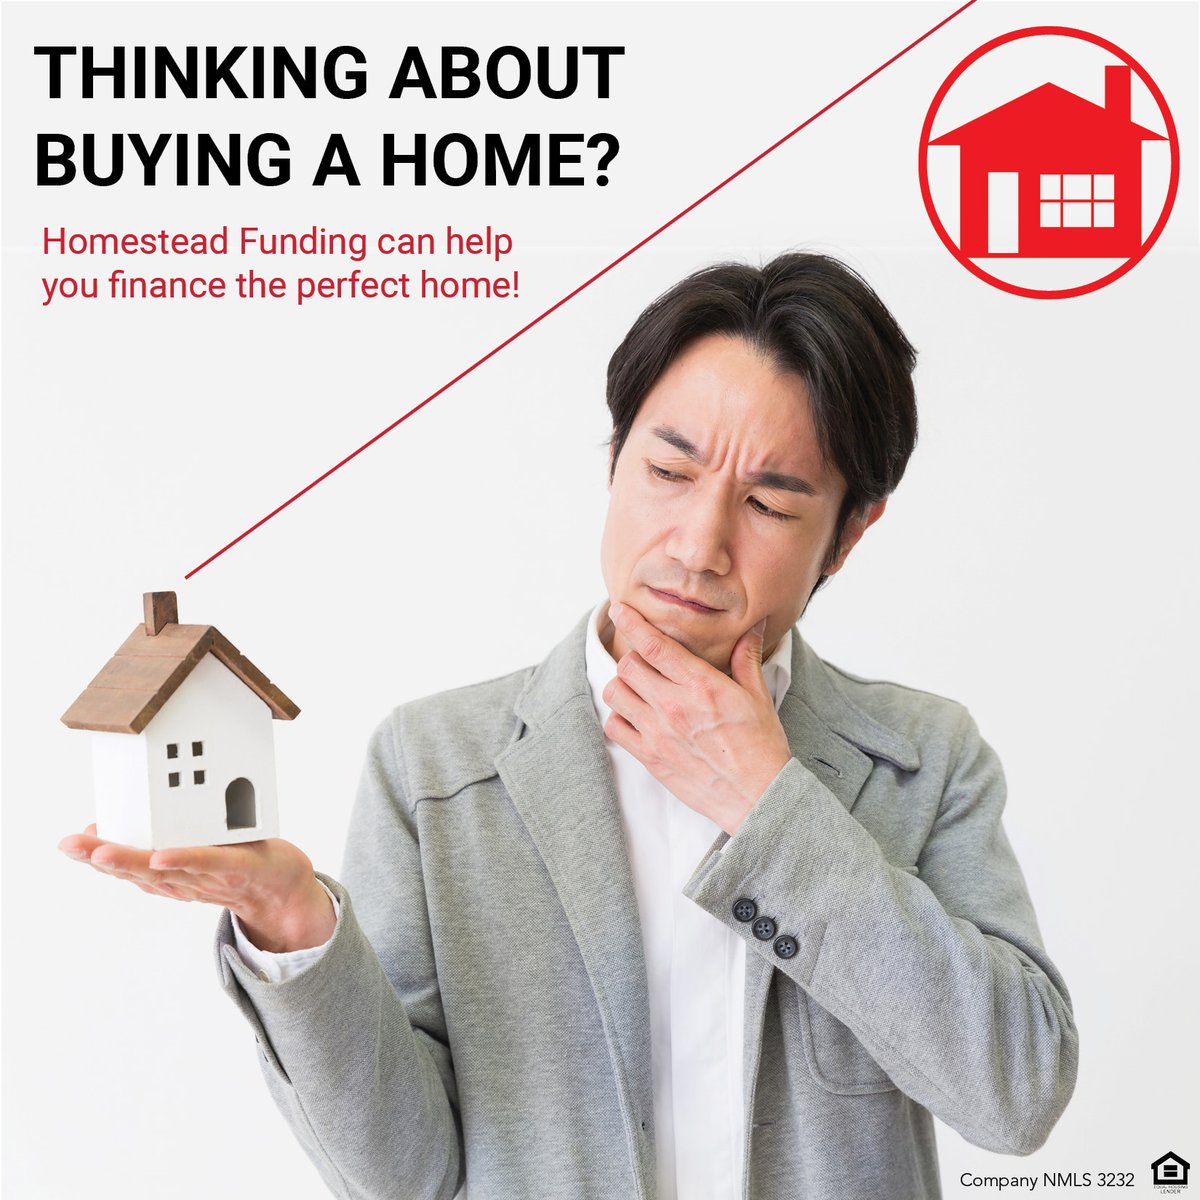 Contact me today for all your home finance options! #thinkingaboutbuying #finance #perfecthome #buyingahome #purchase #mortgage #homeloan #homeownership #locallender